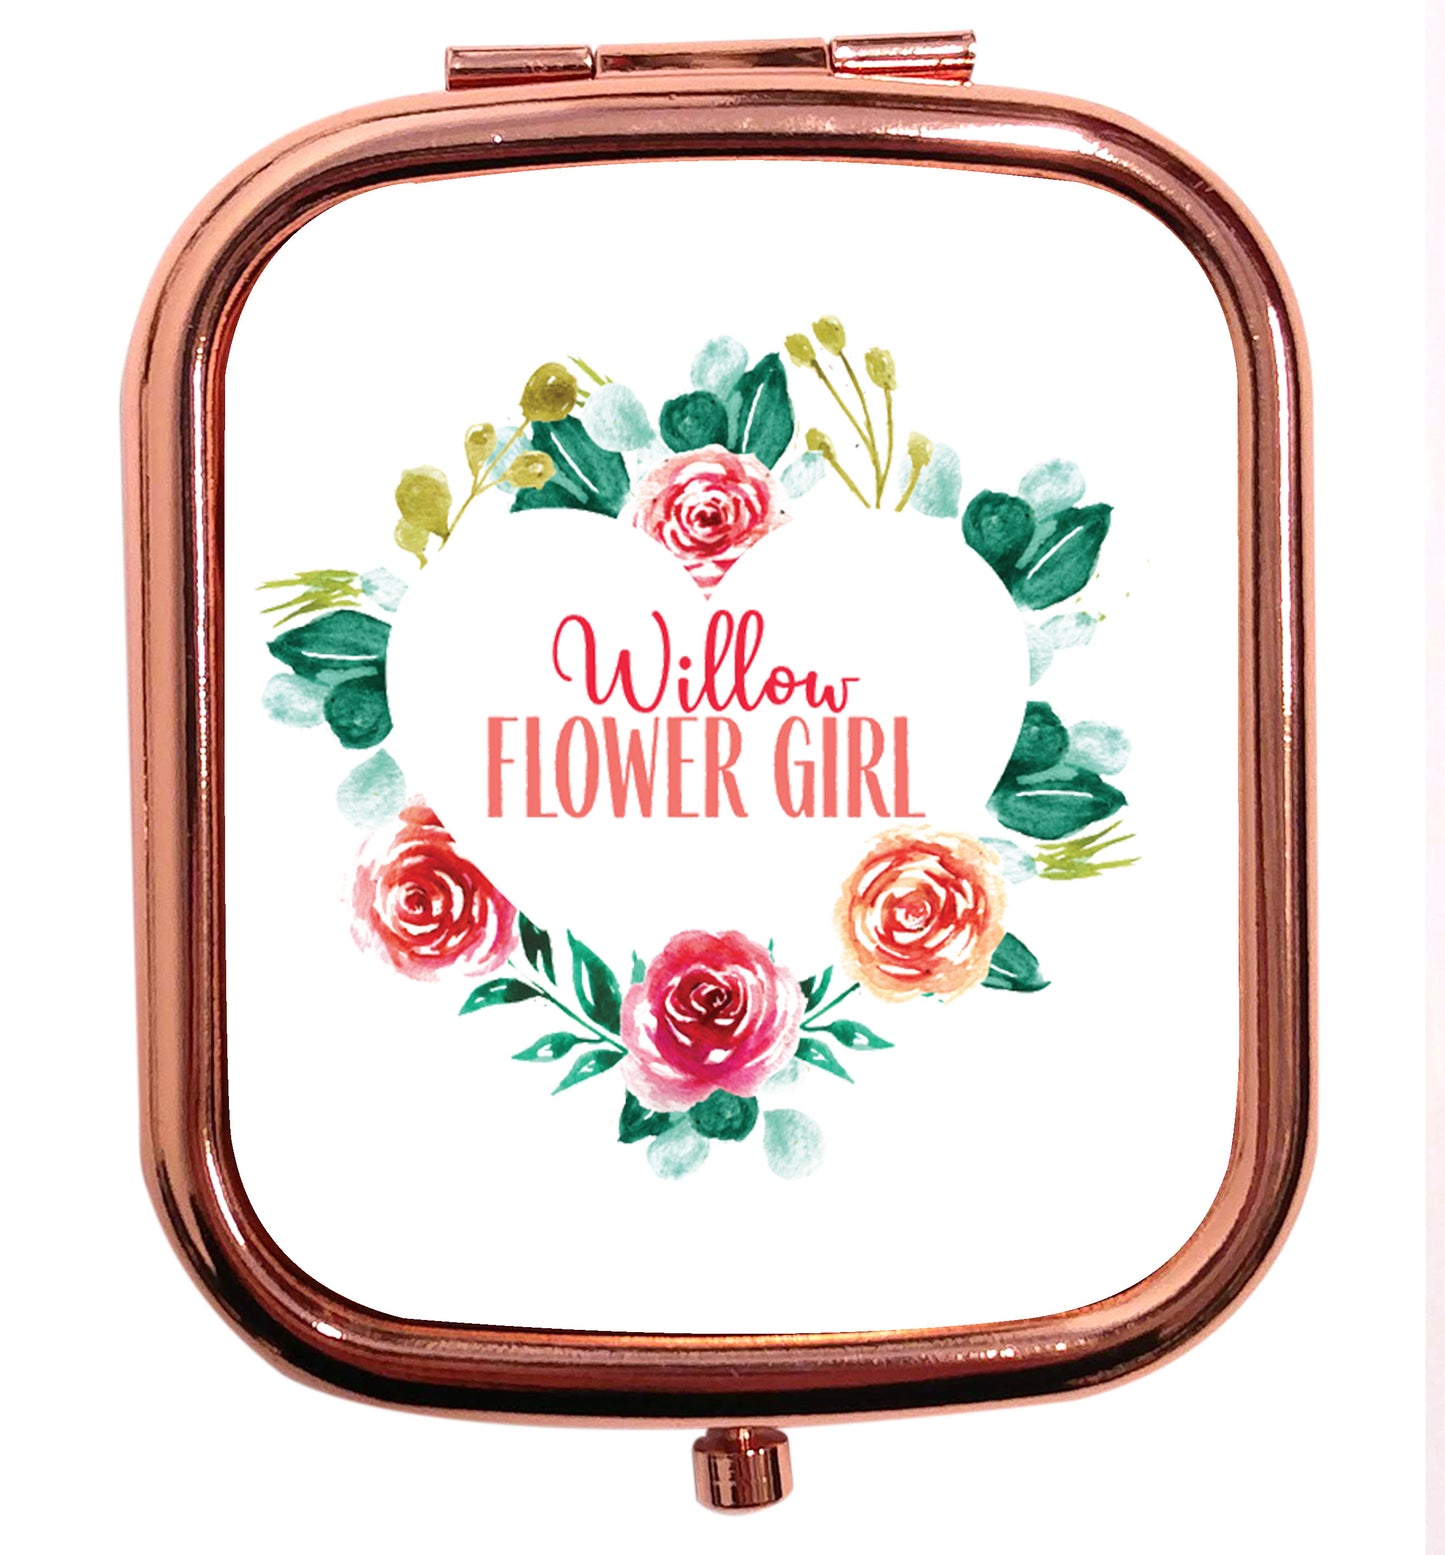 Perfect wedding guest favours or hen party gifts! Personalised bridal floral wreath designs, any name, any role! rose gold square pocket mirror